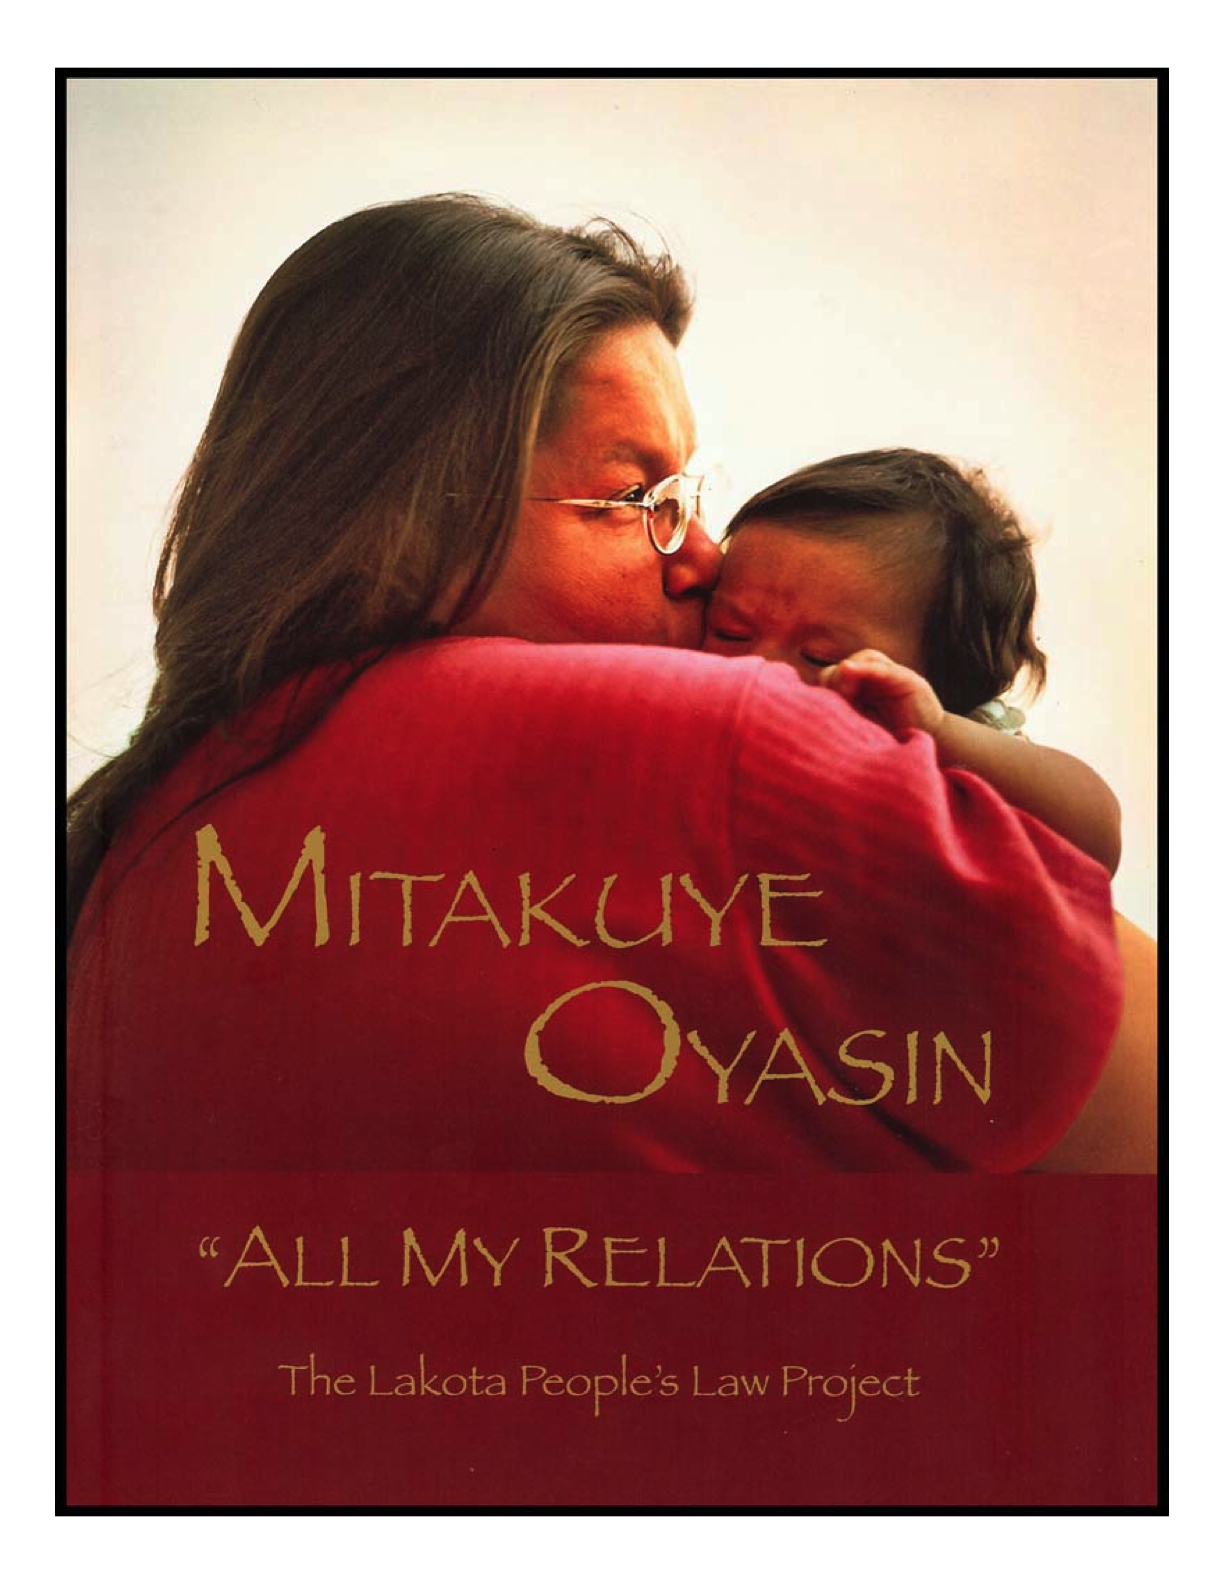 All My Relations—The Lakota in Their Own Words http://lakotapeopleslawproject.org/resources/